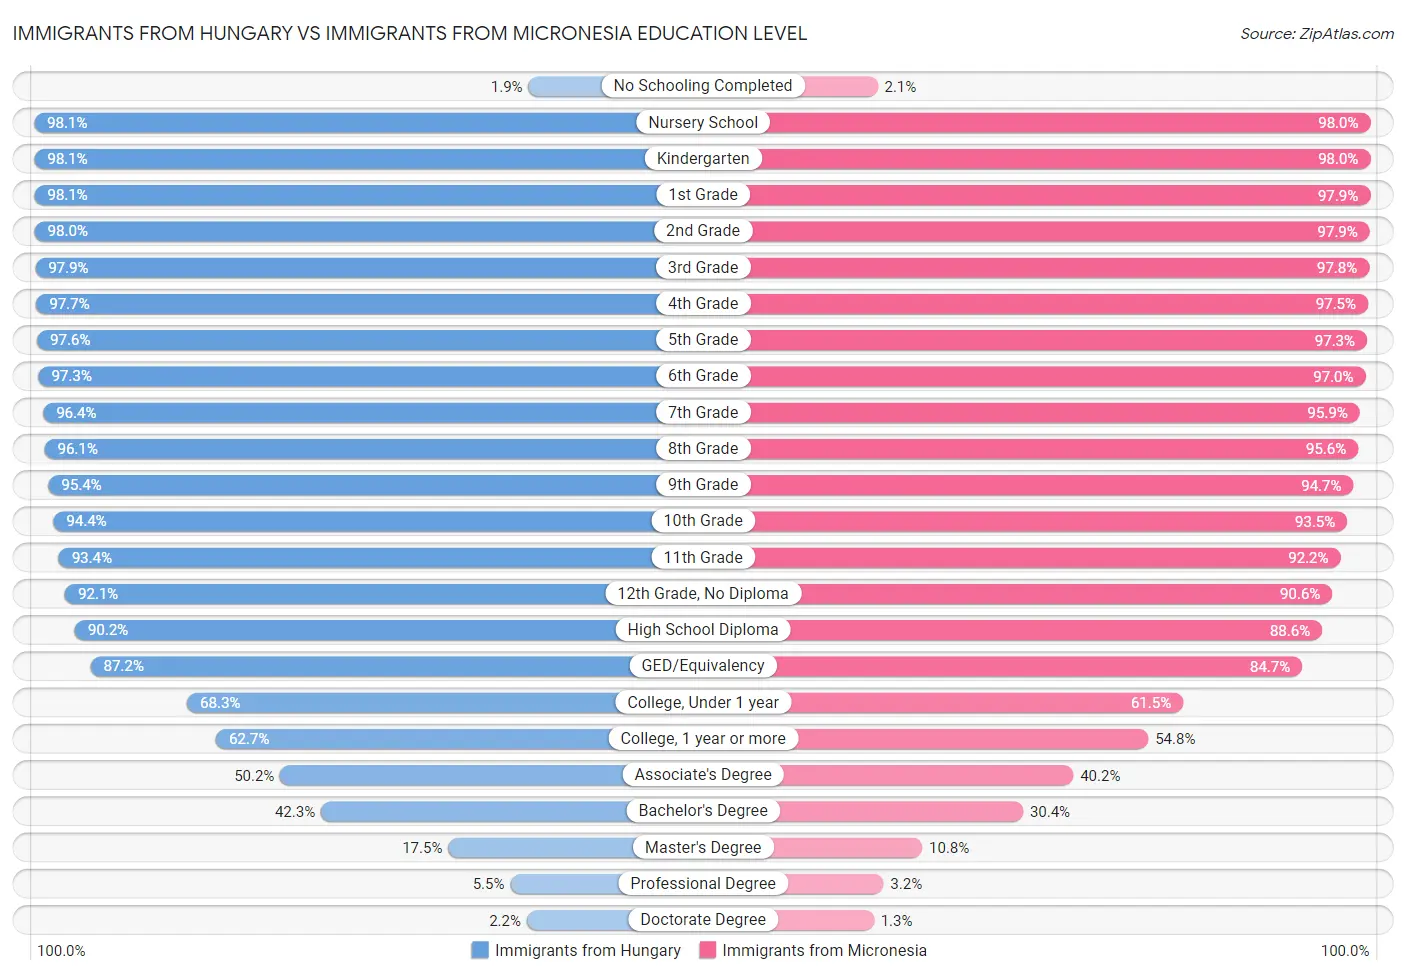 Immigrants from Hungary vs Immigrants from Micronesia Education Level